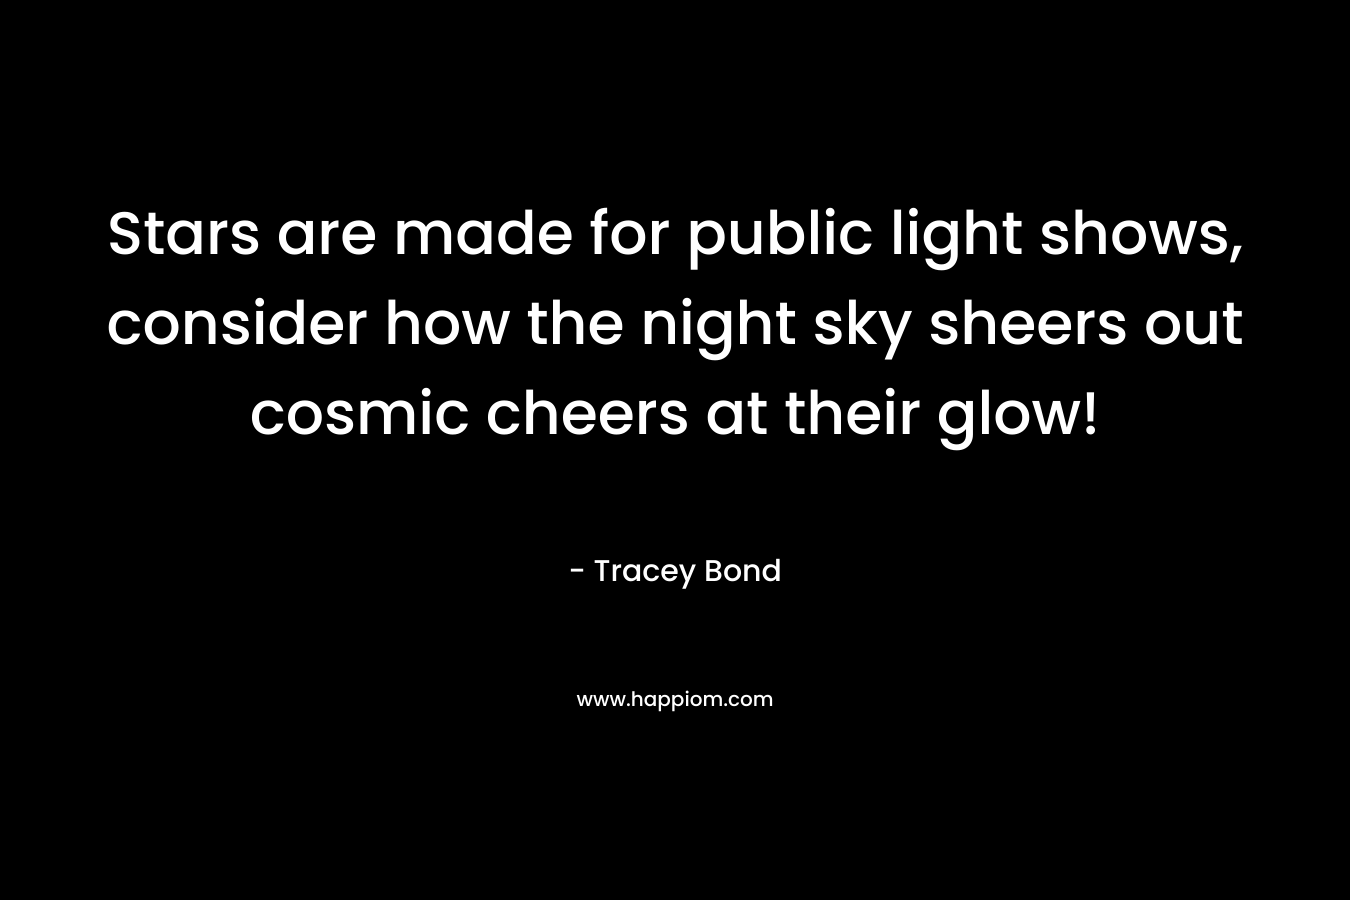 Stars are made for public light shows, consider how the night sky sheers out cosmic cheers at their glow!